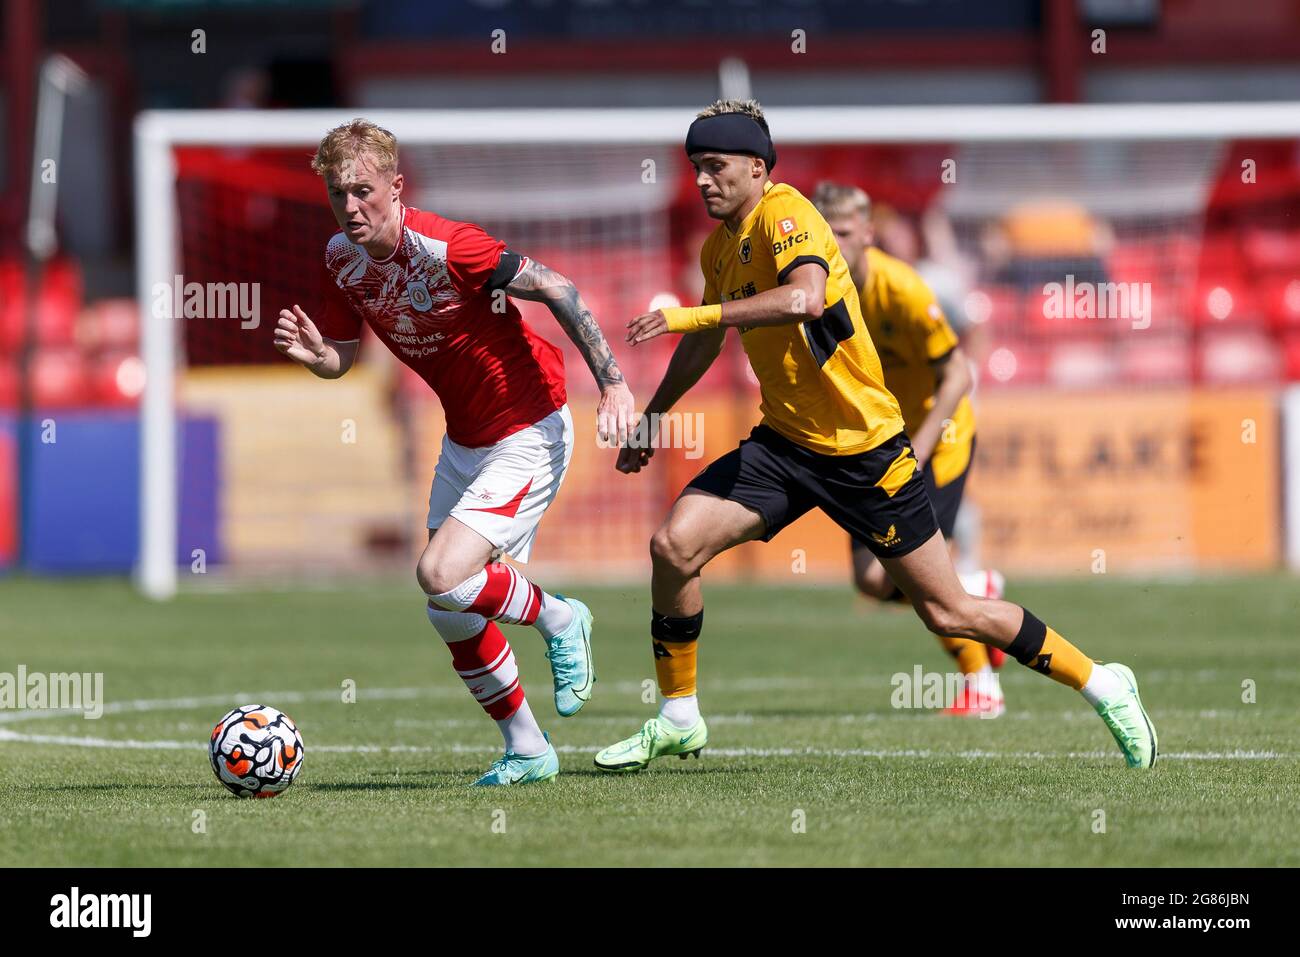 Crewe, UK. 17th July, 2021. Charlie Kirk of Crewe Alexandra and Raul Jimenez of Wolverhampton Wanderers during the Pre-Season Friendly match between Crewe Alexandra and Wolverhampton Wanderers at Alexandra Stadium on July 17th 2021 in Crewe, England. (Photo by Daniel Chesterton/phcimages.com) Credit: PHC Images/Alamy Live News Stock Photo